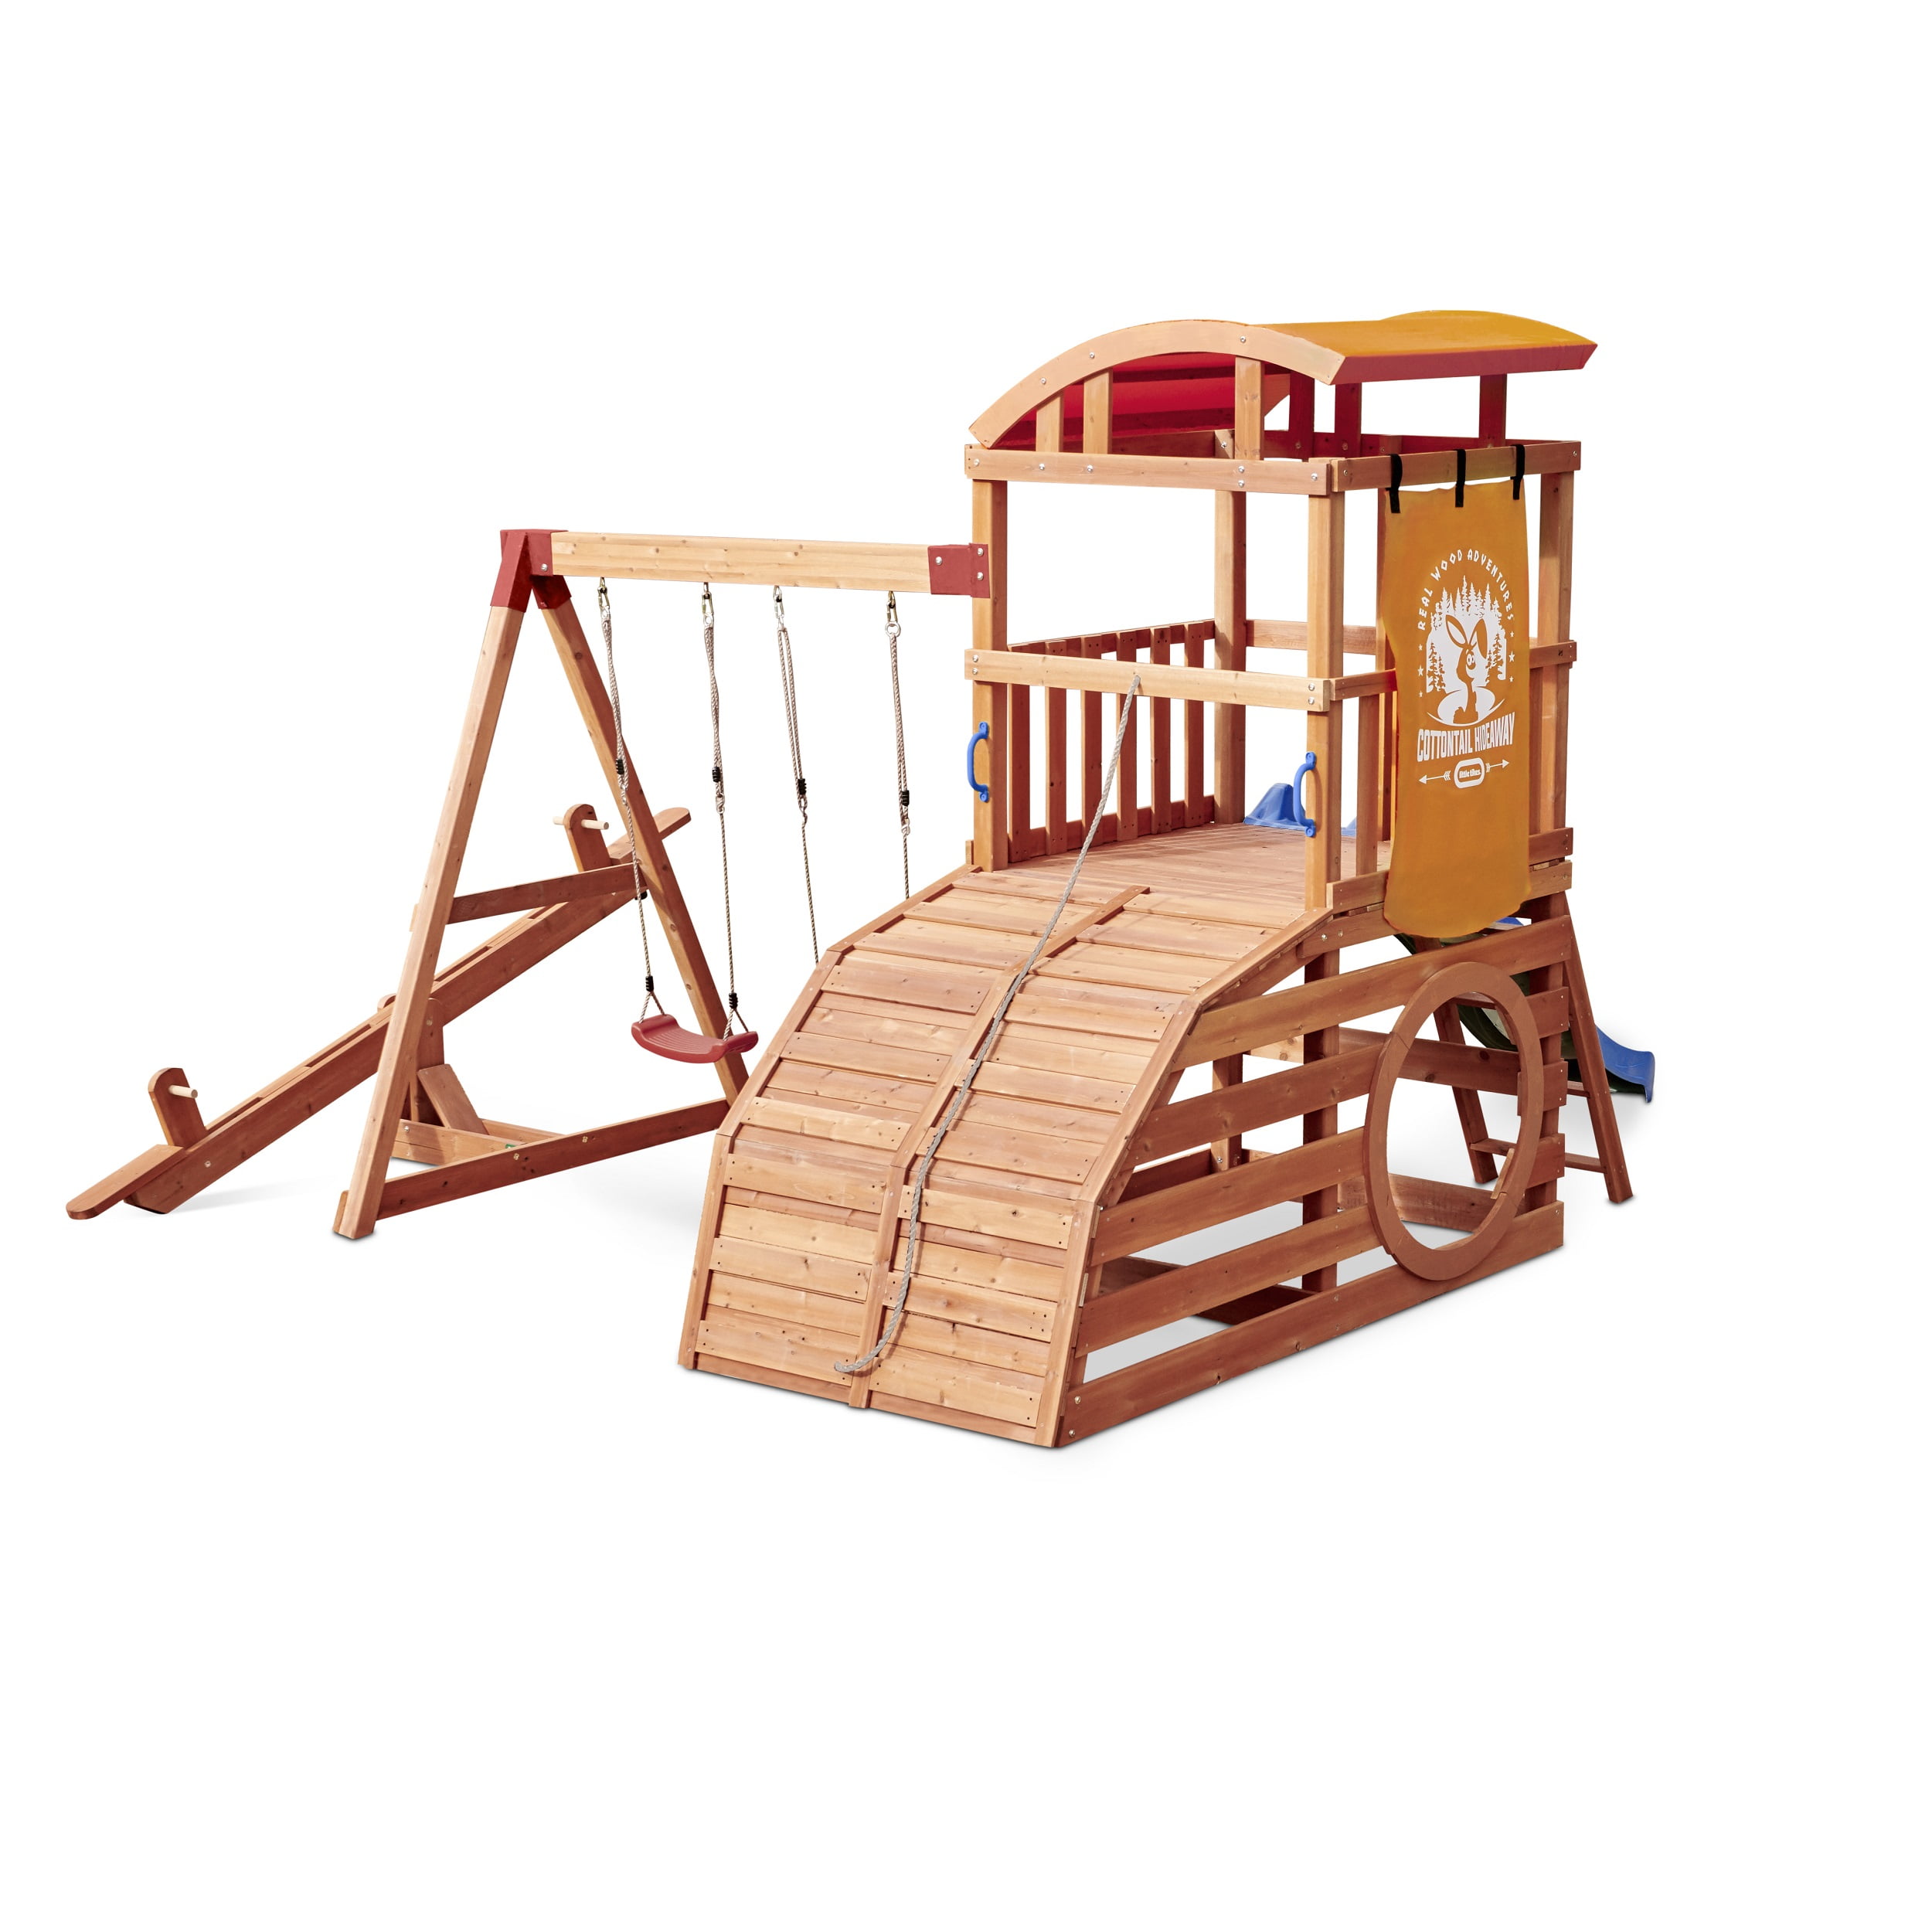 Real Wood Adventures Cottontail, Wooden Outdoor Playsets